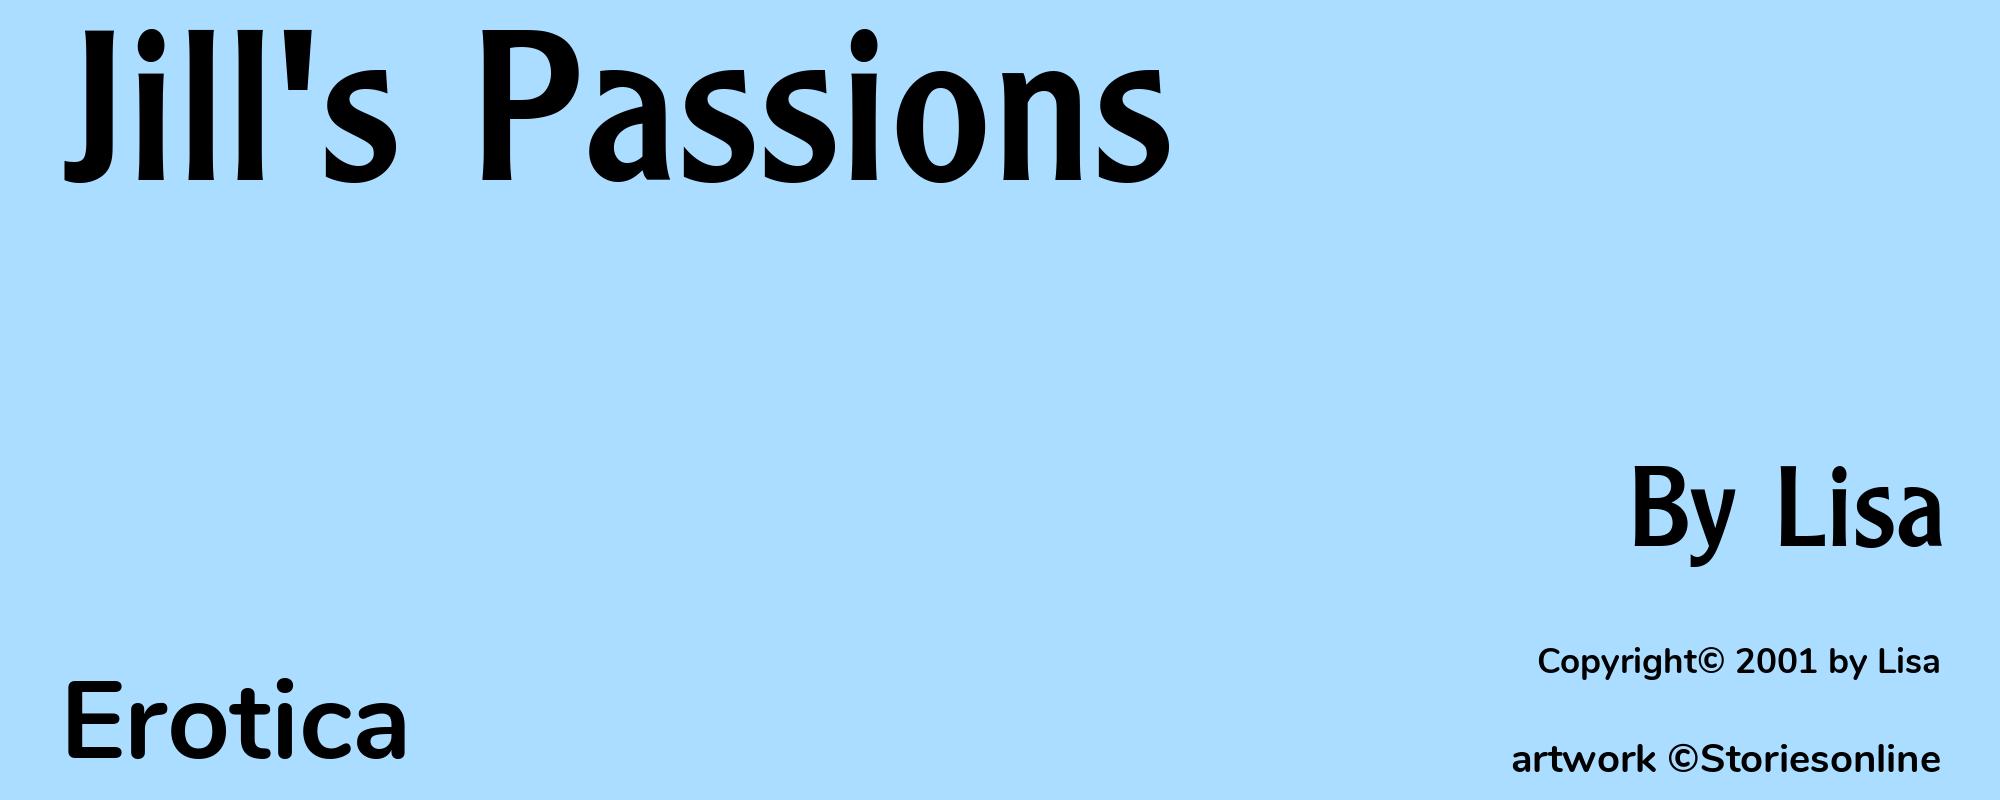 Jill's Passions - Cover